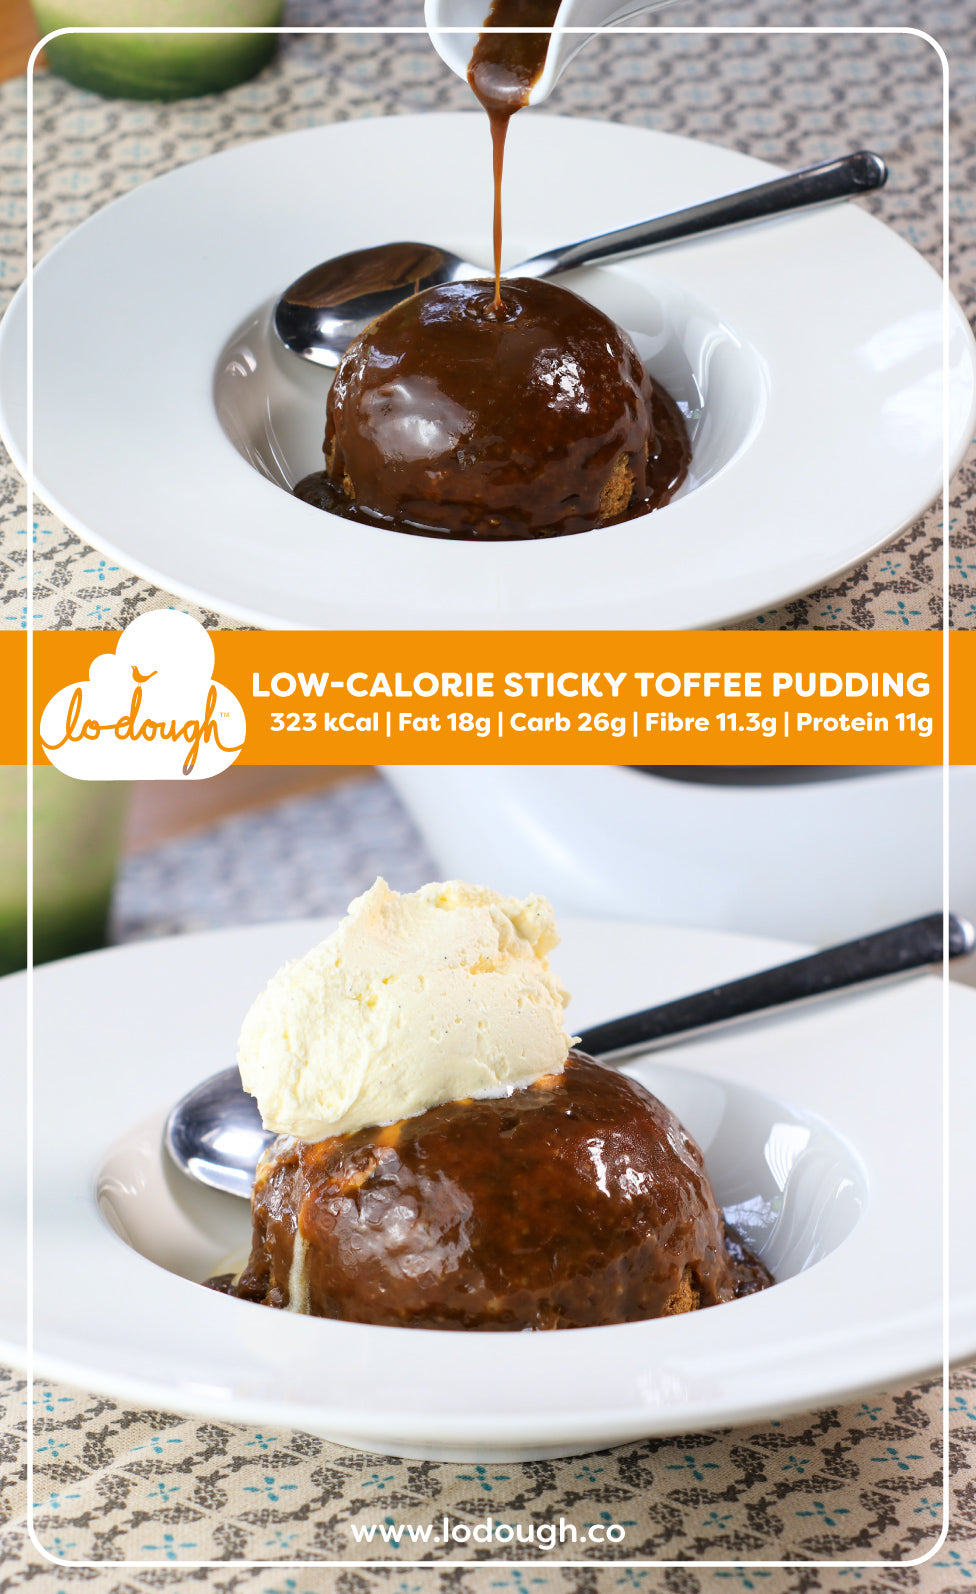 Low-Calorie Sticky Toffee Pudding